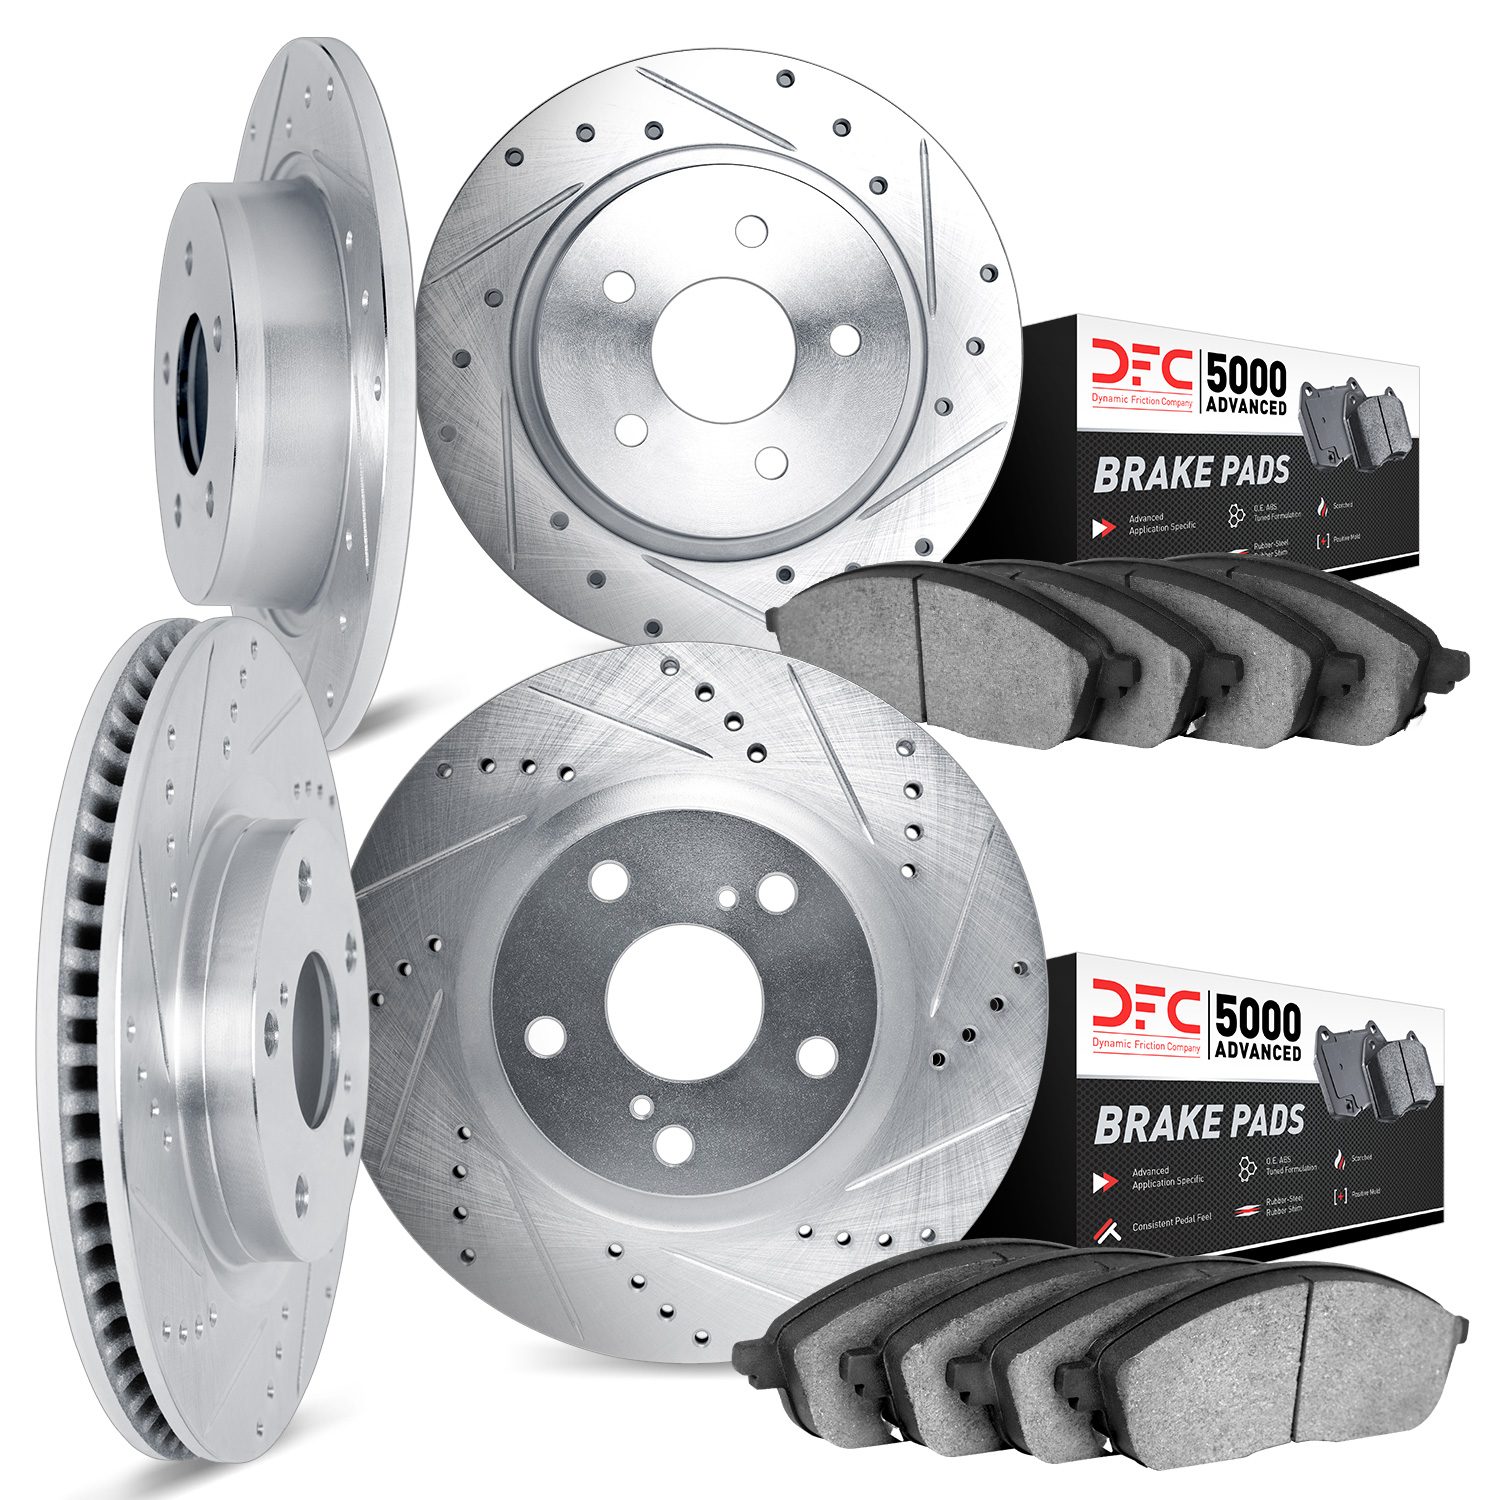 7504-63003 Drilled/Slotted Brake Rotors w/5000 Advanced Brake Pads Kit [Silver], 2003-2009 Mercedes-Benz, Position: Front and Re